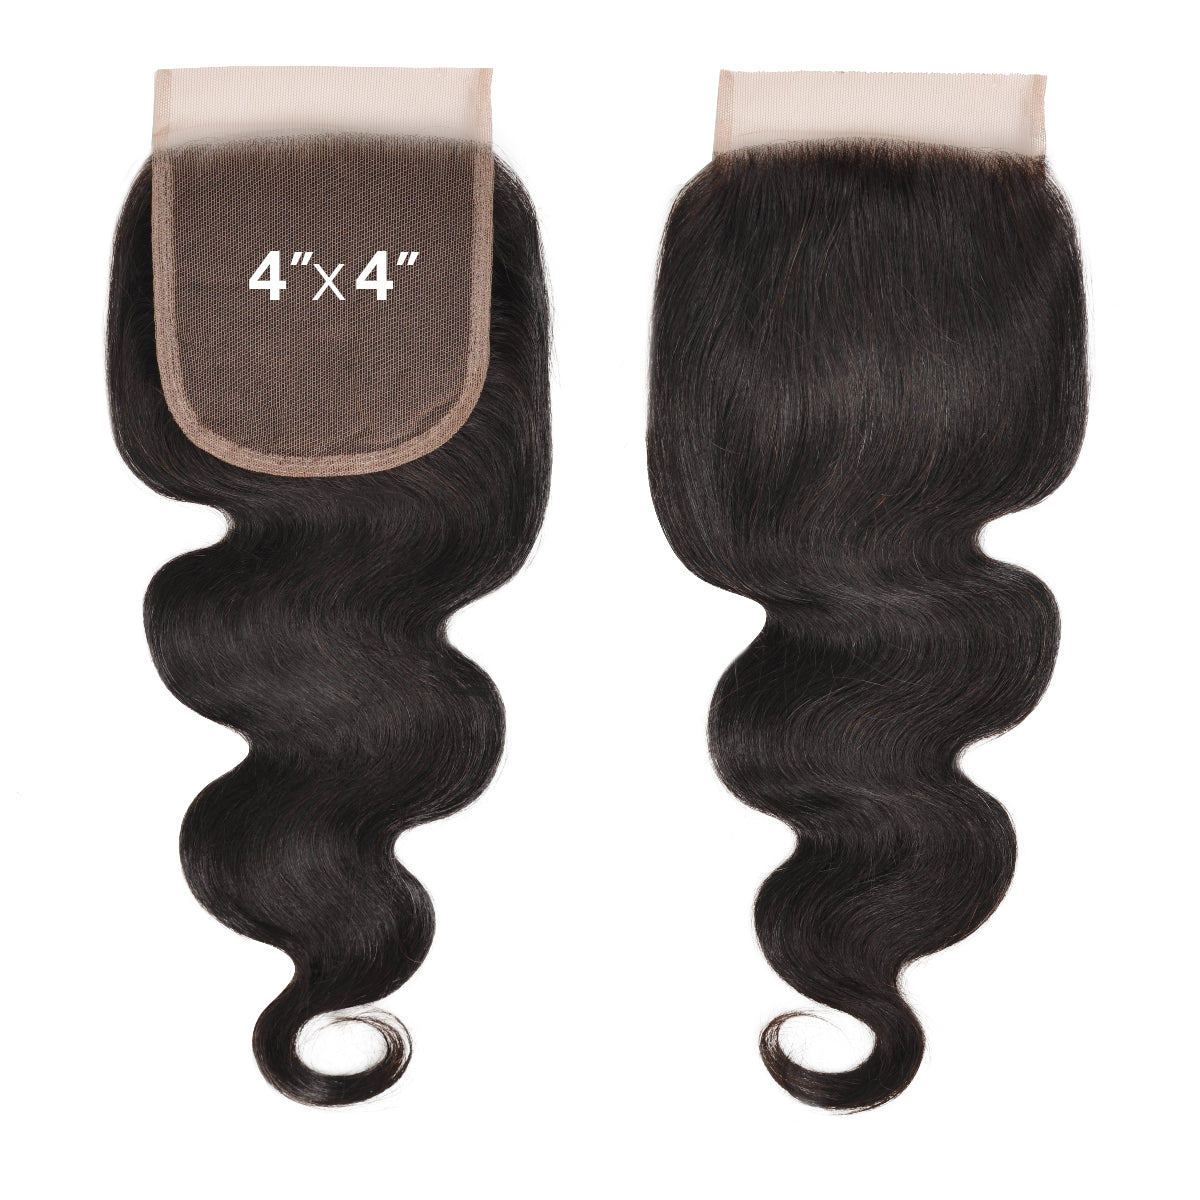 4x4, HD Lace, Closure, Free Part, Wide Lace, Body Wave